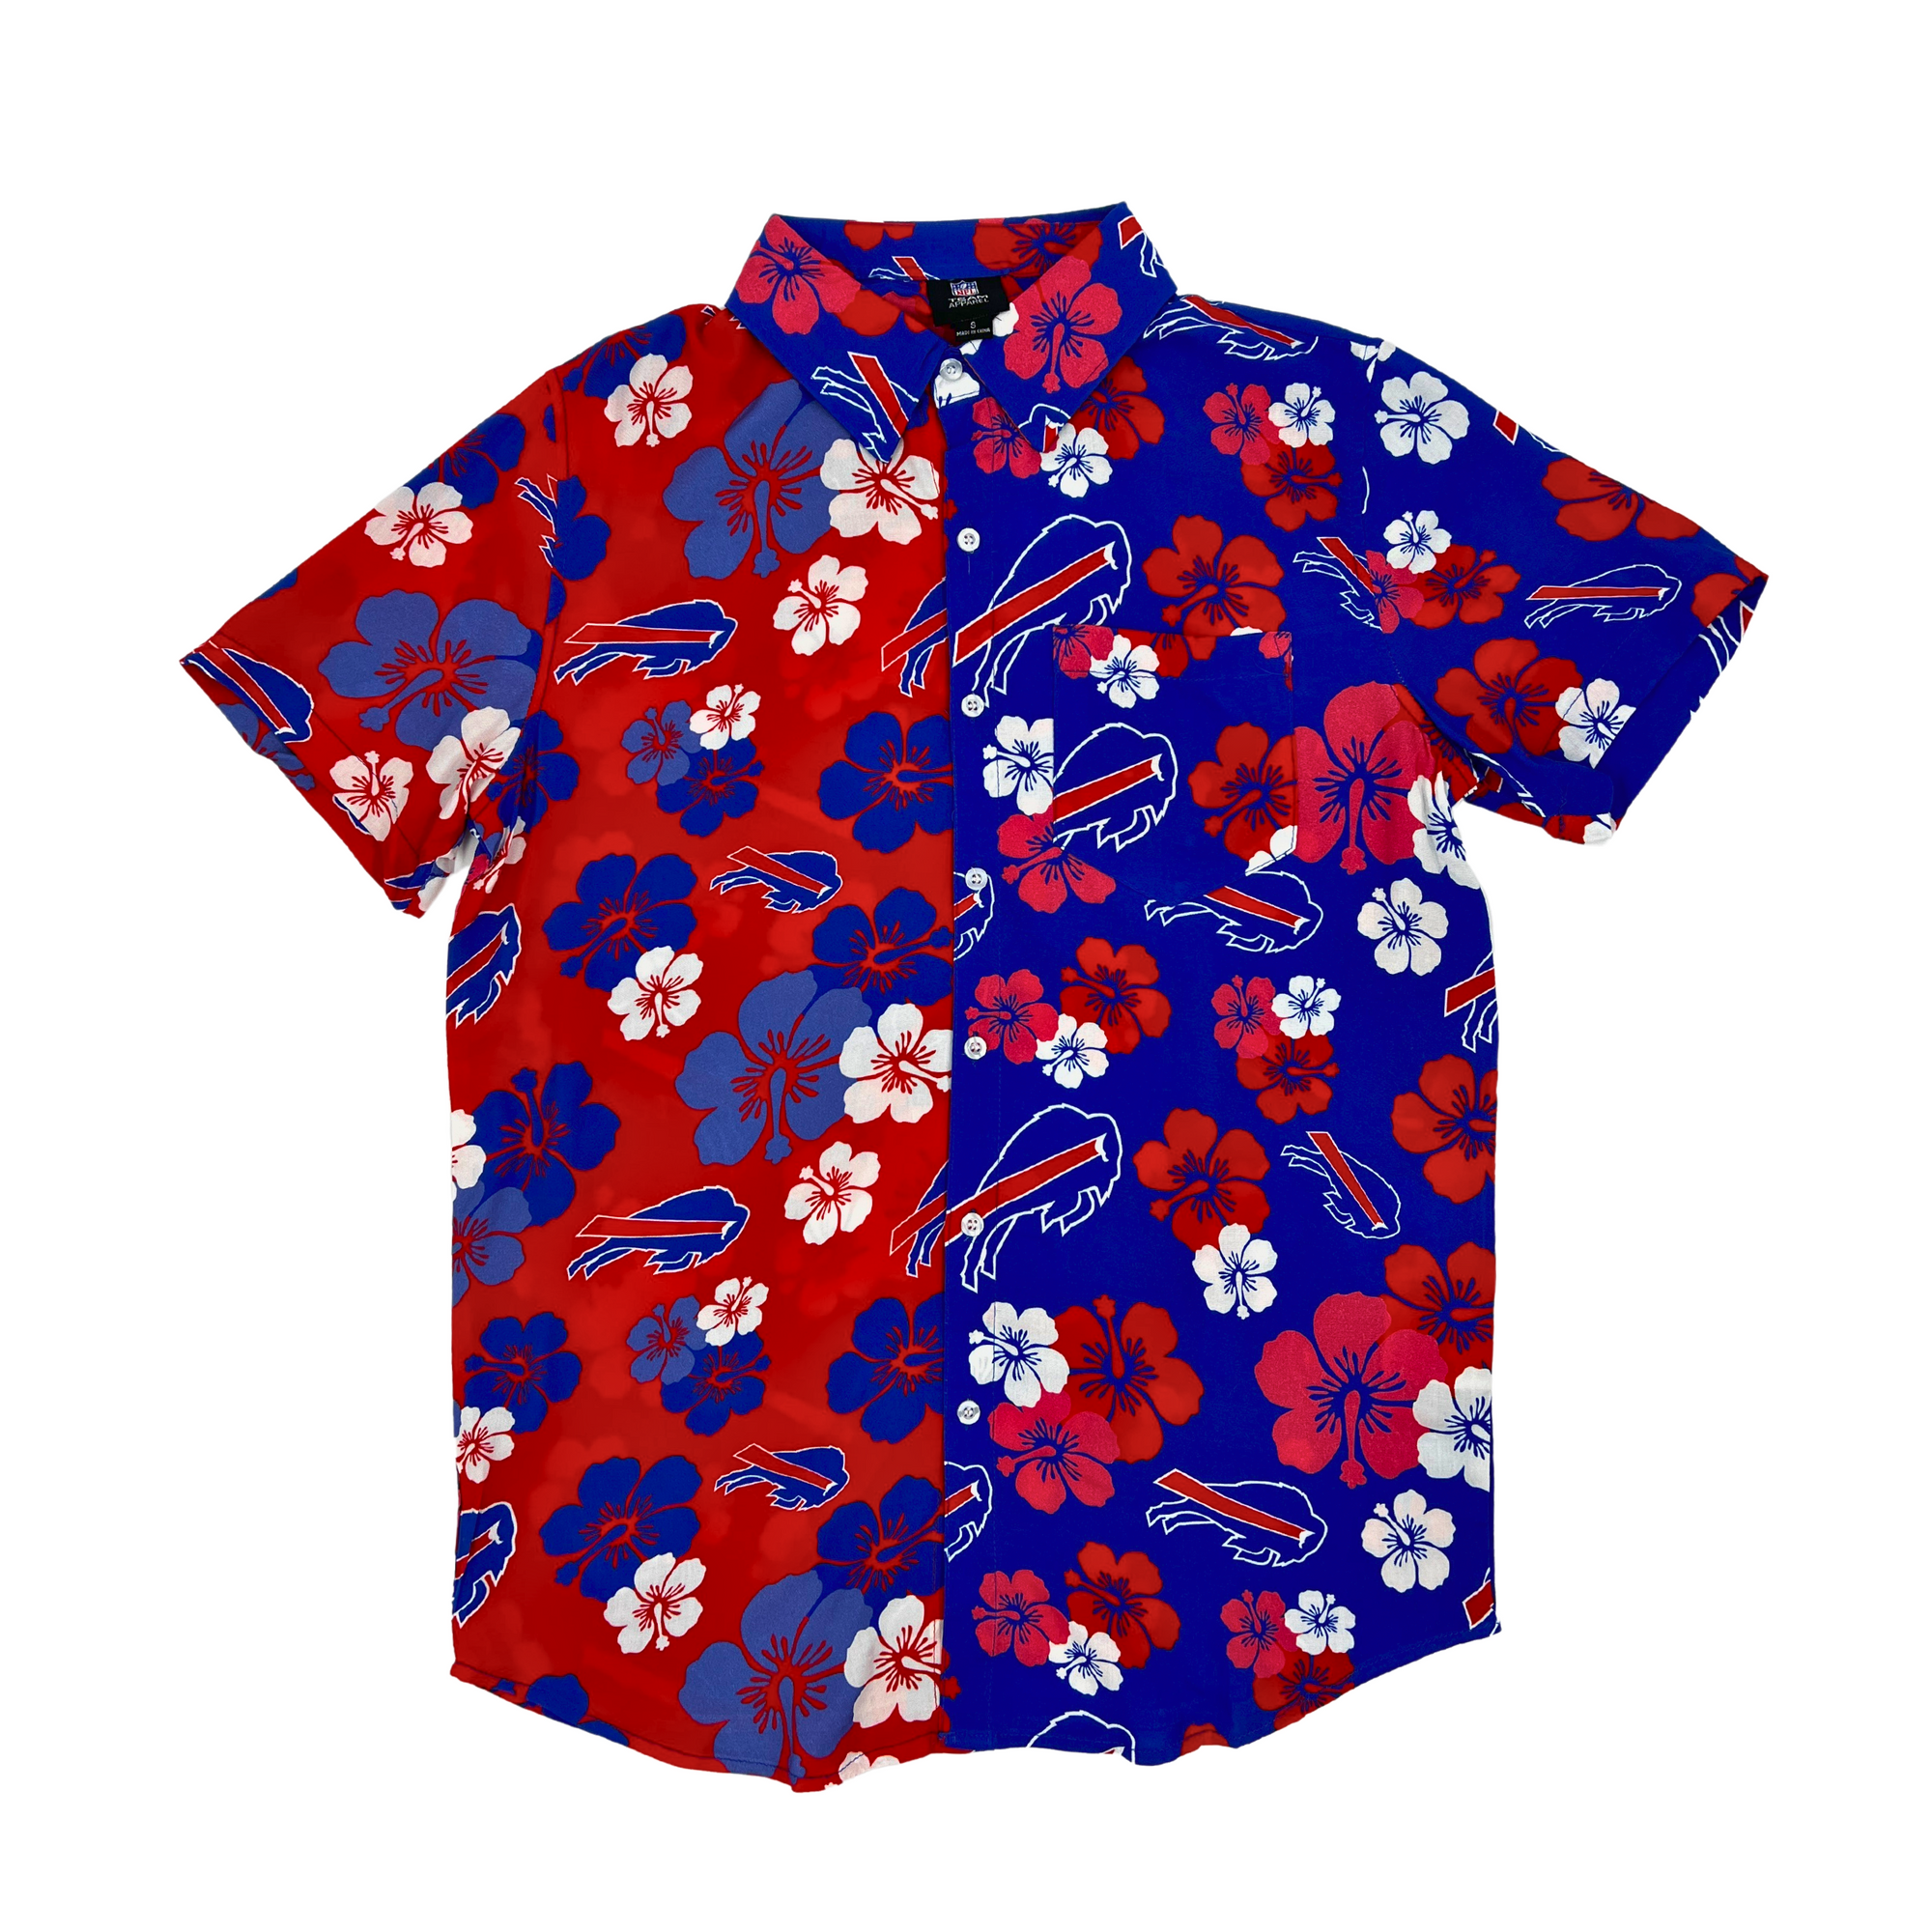 Buffalo Bills red and blue split Color Floral Button Up Shirt